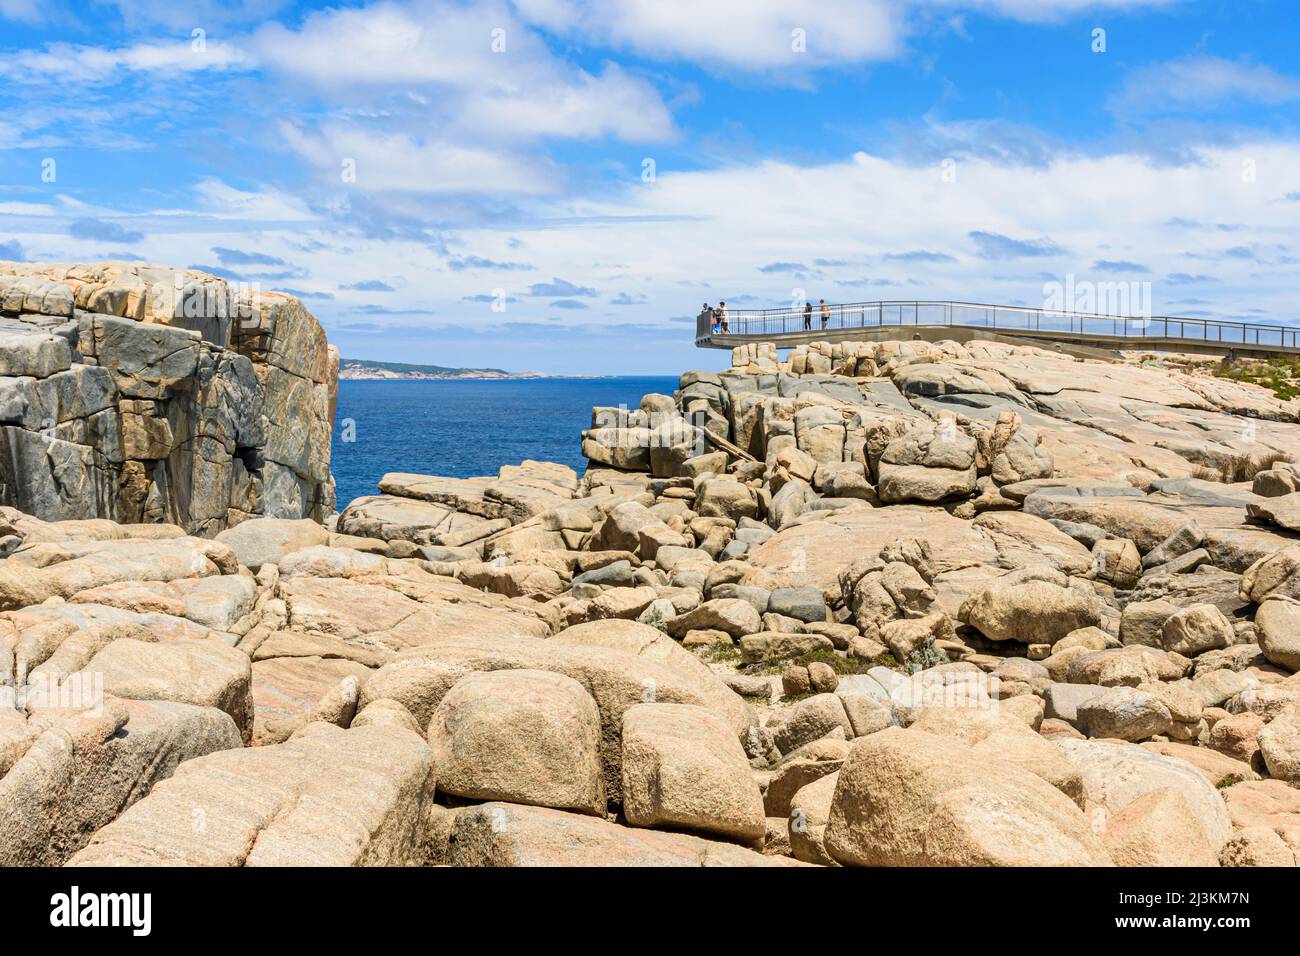 The lookout viewing platform 40m above The Gap in Torndirrup National Park on the Torndirrup Peninsula, Albany Western Australia, Australia Stock Photo